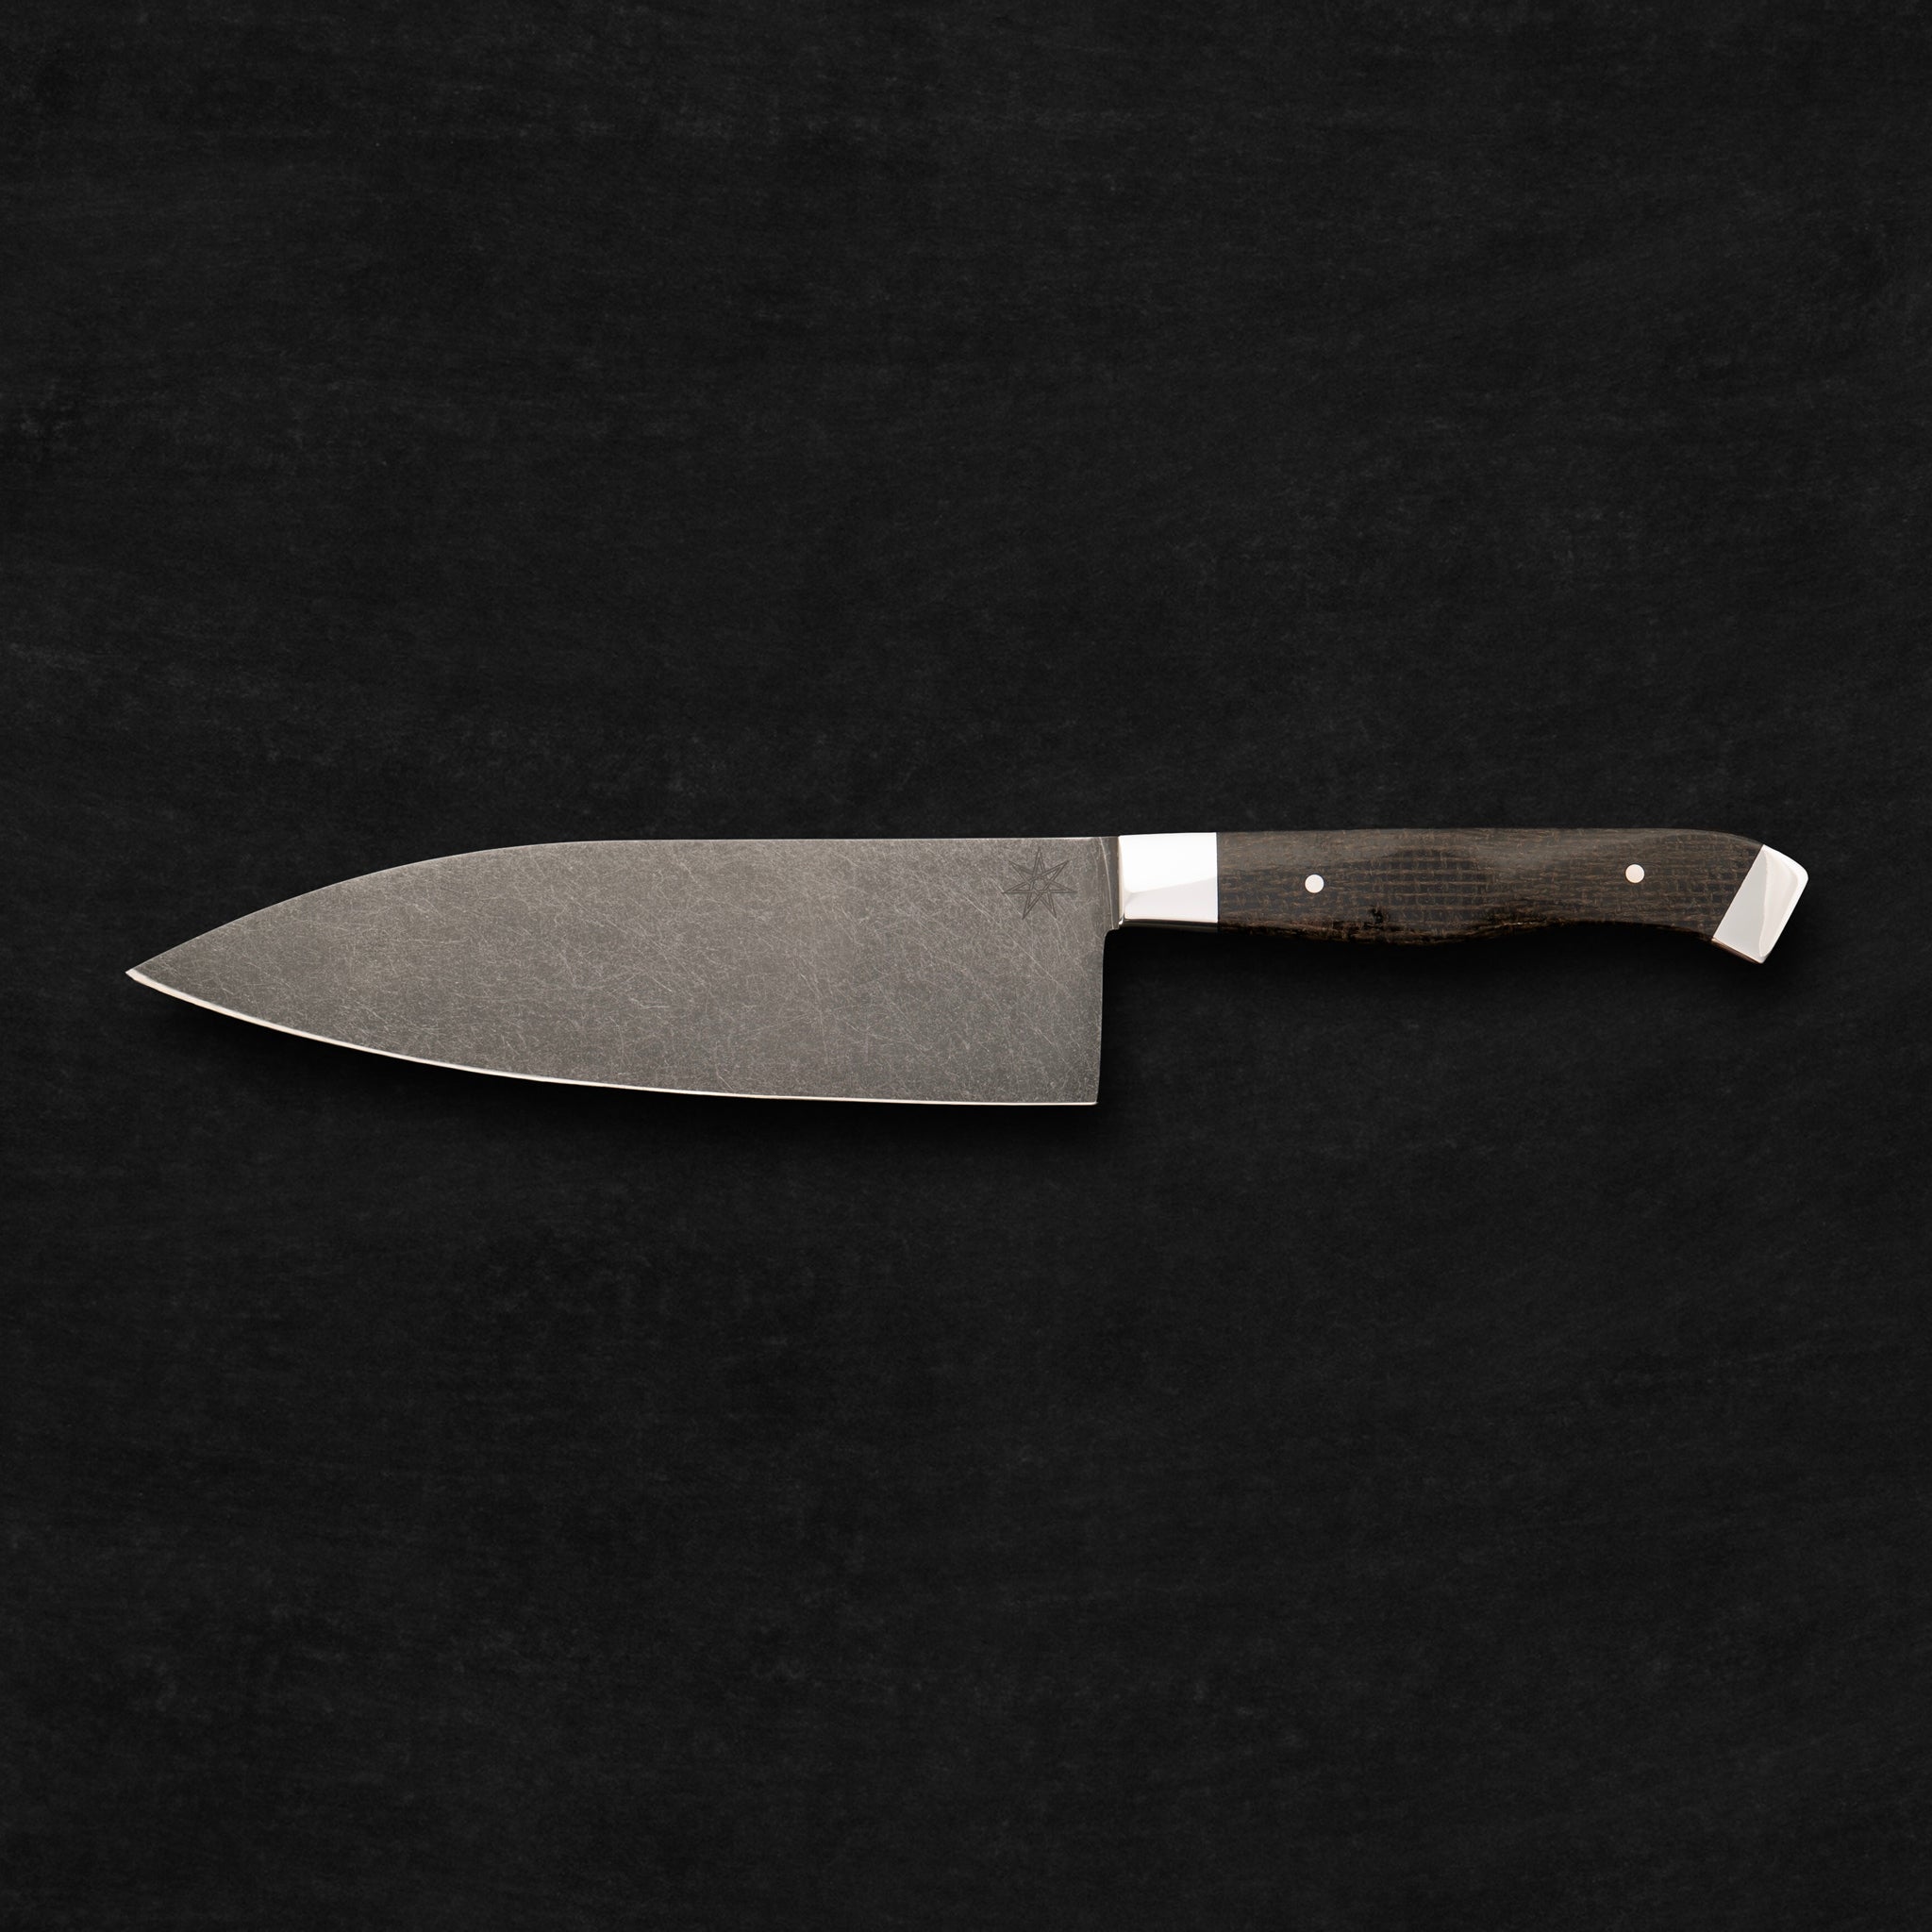 7" Carbon Steel Chef Knife with Stonewash Finish Blade, Black Burlap Micarta Handle, Stainless Steel Bolster and Pommel by Town Cutler